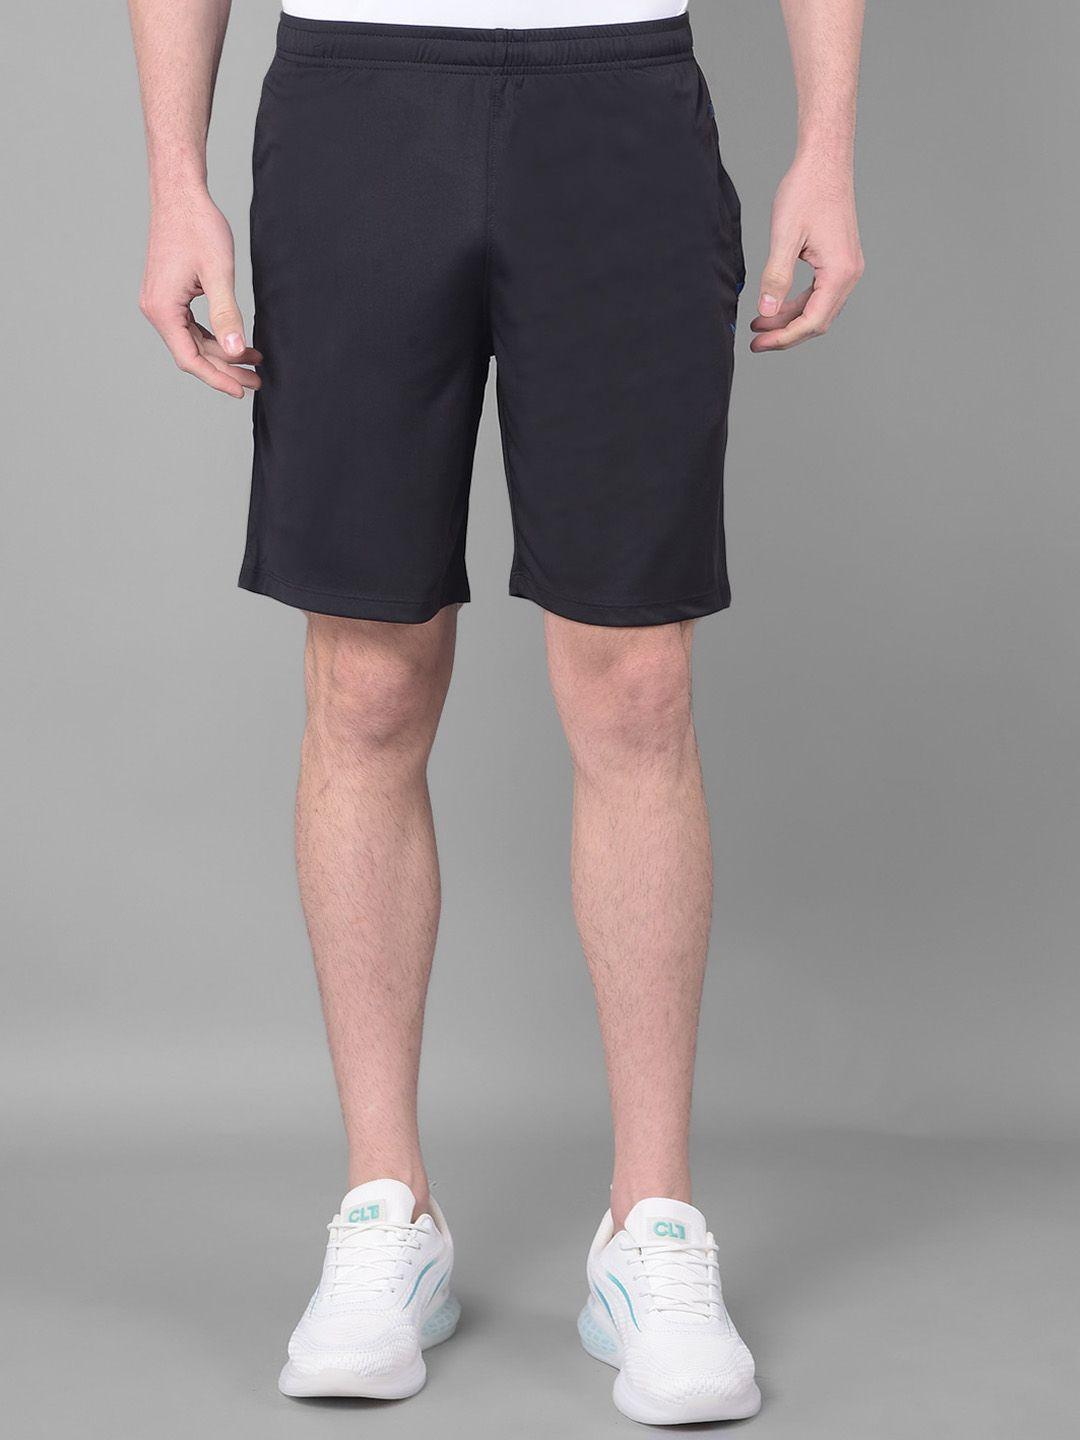 force nxt men mid-rise antimicrobial technology sports shorts